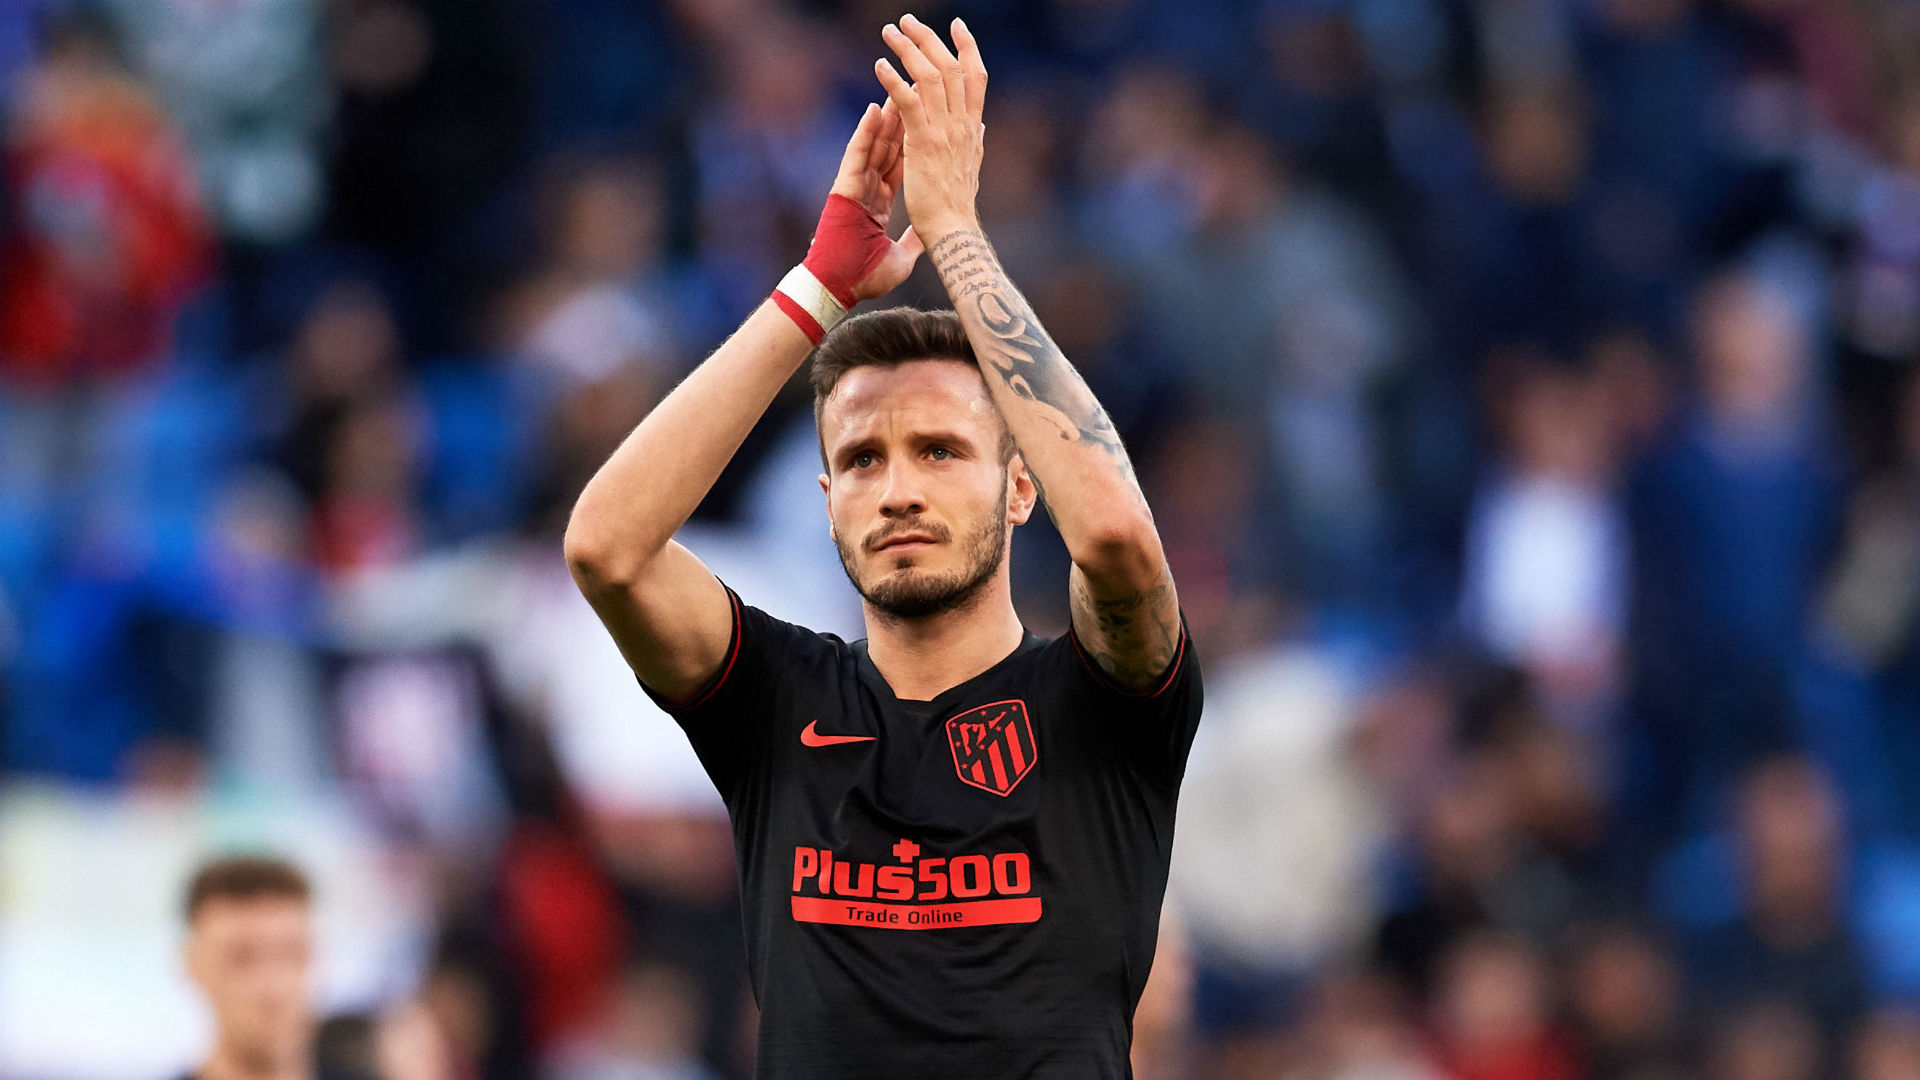 It turns out, as most had predicted, Saul Niguez's talk of a "new club" was not transfer-related.